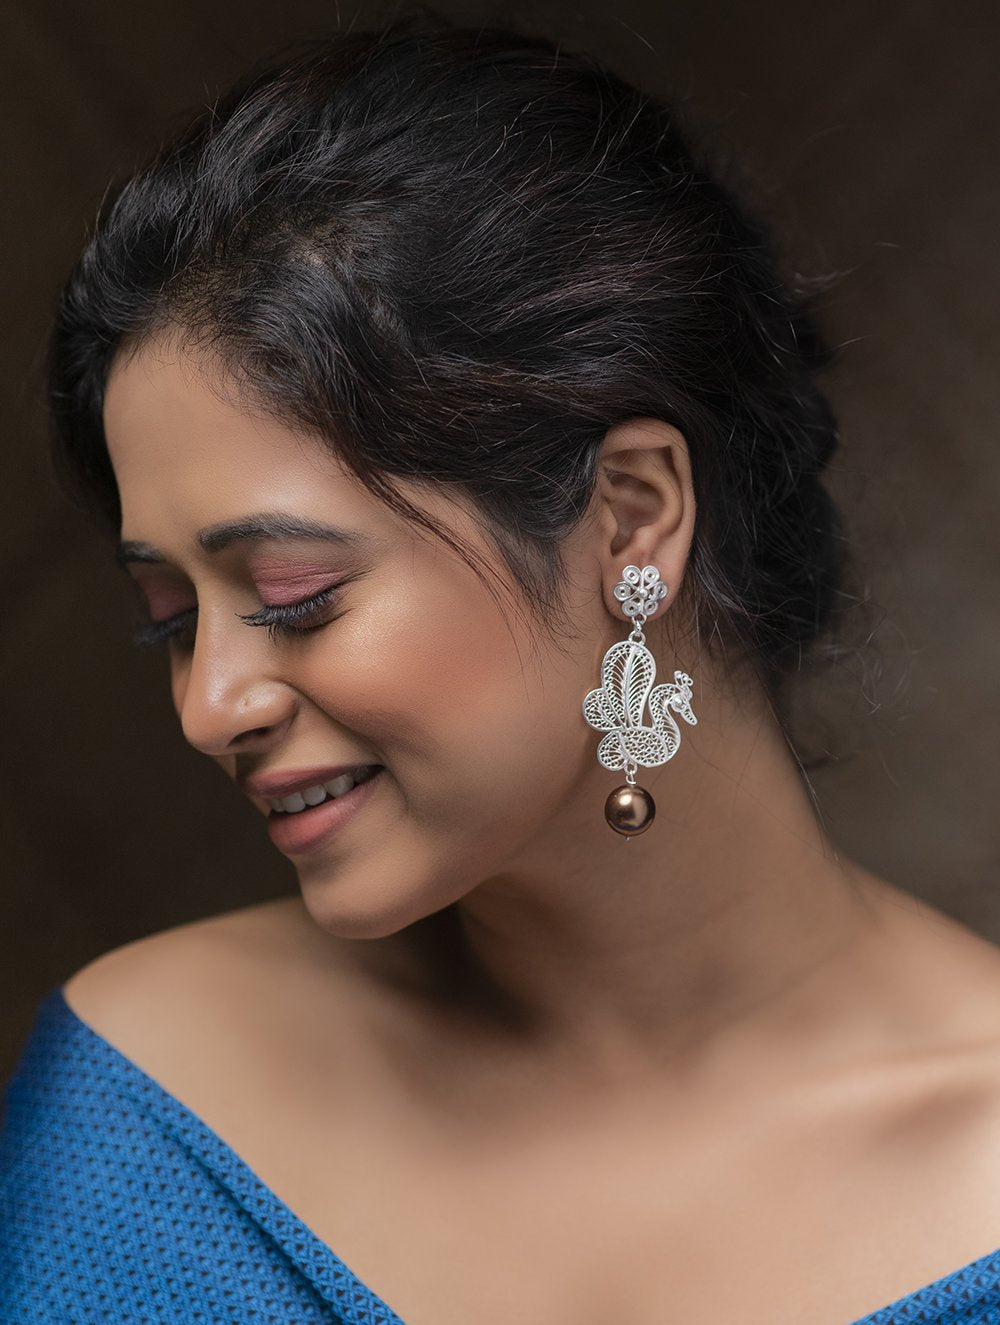 Load image into Gallery viewer, Exclusive Sterling Silver Filigree Earrings - Large Peacock Danglers with Pearl Drops